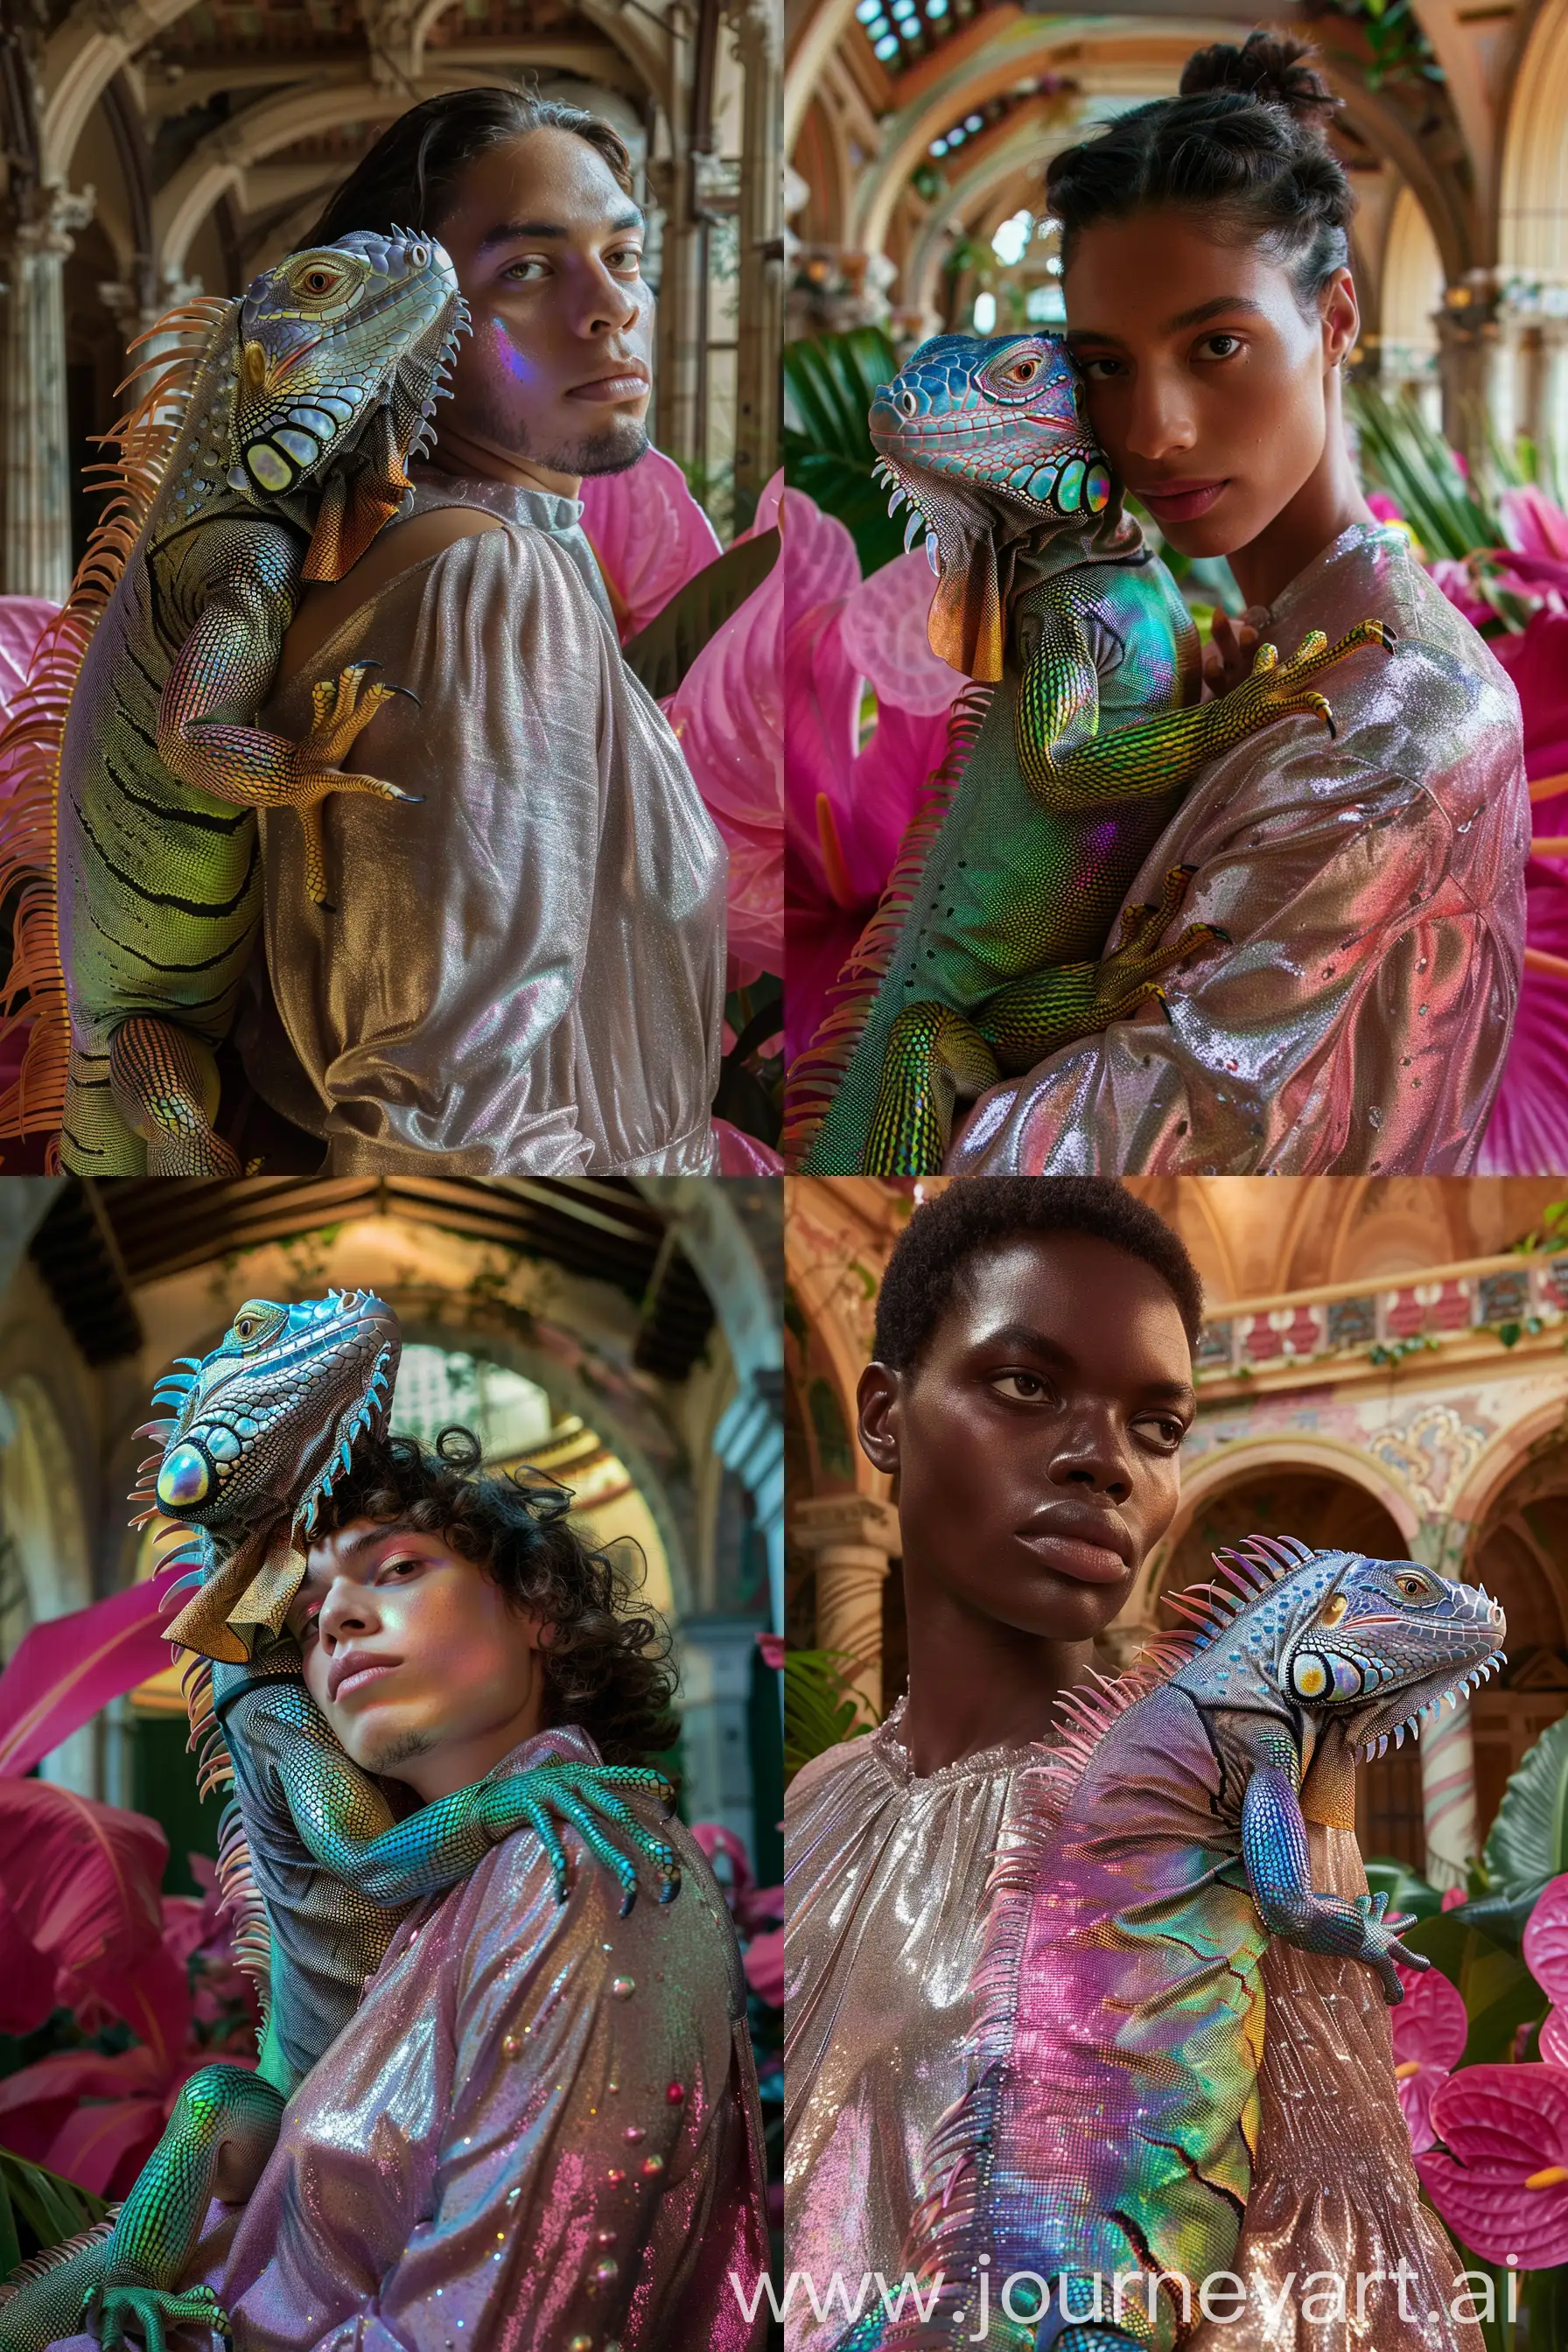 a closeup photo of a gorgeous fat hunk man model wearing a shimmering metallic blouse with a huge iridescent rainbow colored iguana sitting on her arm, you can see the details of the iguanas skin, they both look into the camera, the model is standing in a tropical indoor palace garden with arches, big iridescent pink flowers grow around them, dreamy aesthetic --ar 2:3 --v 6.0